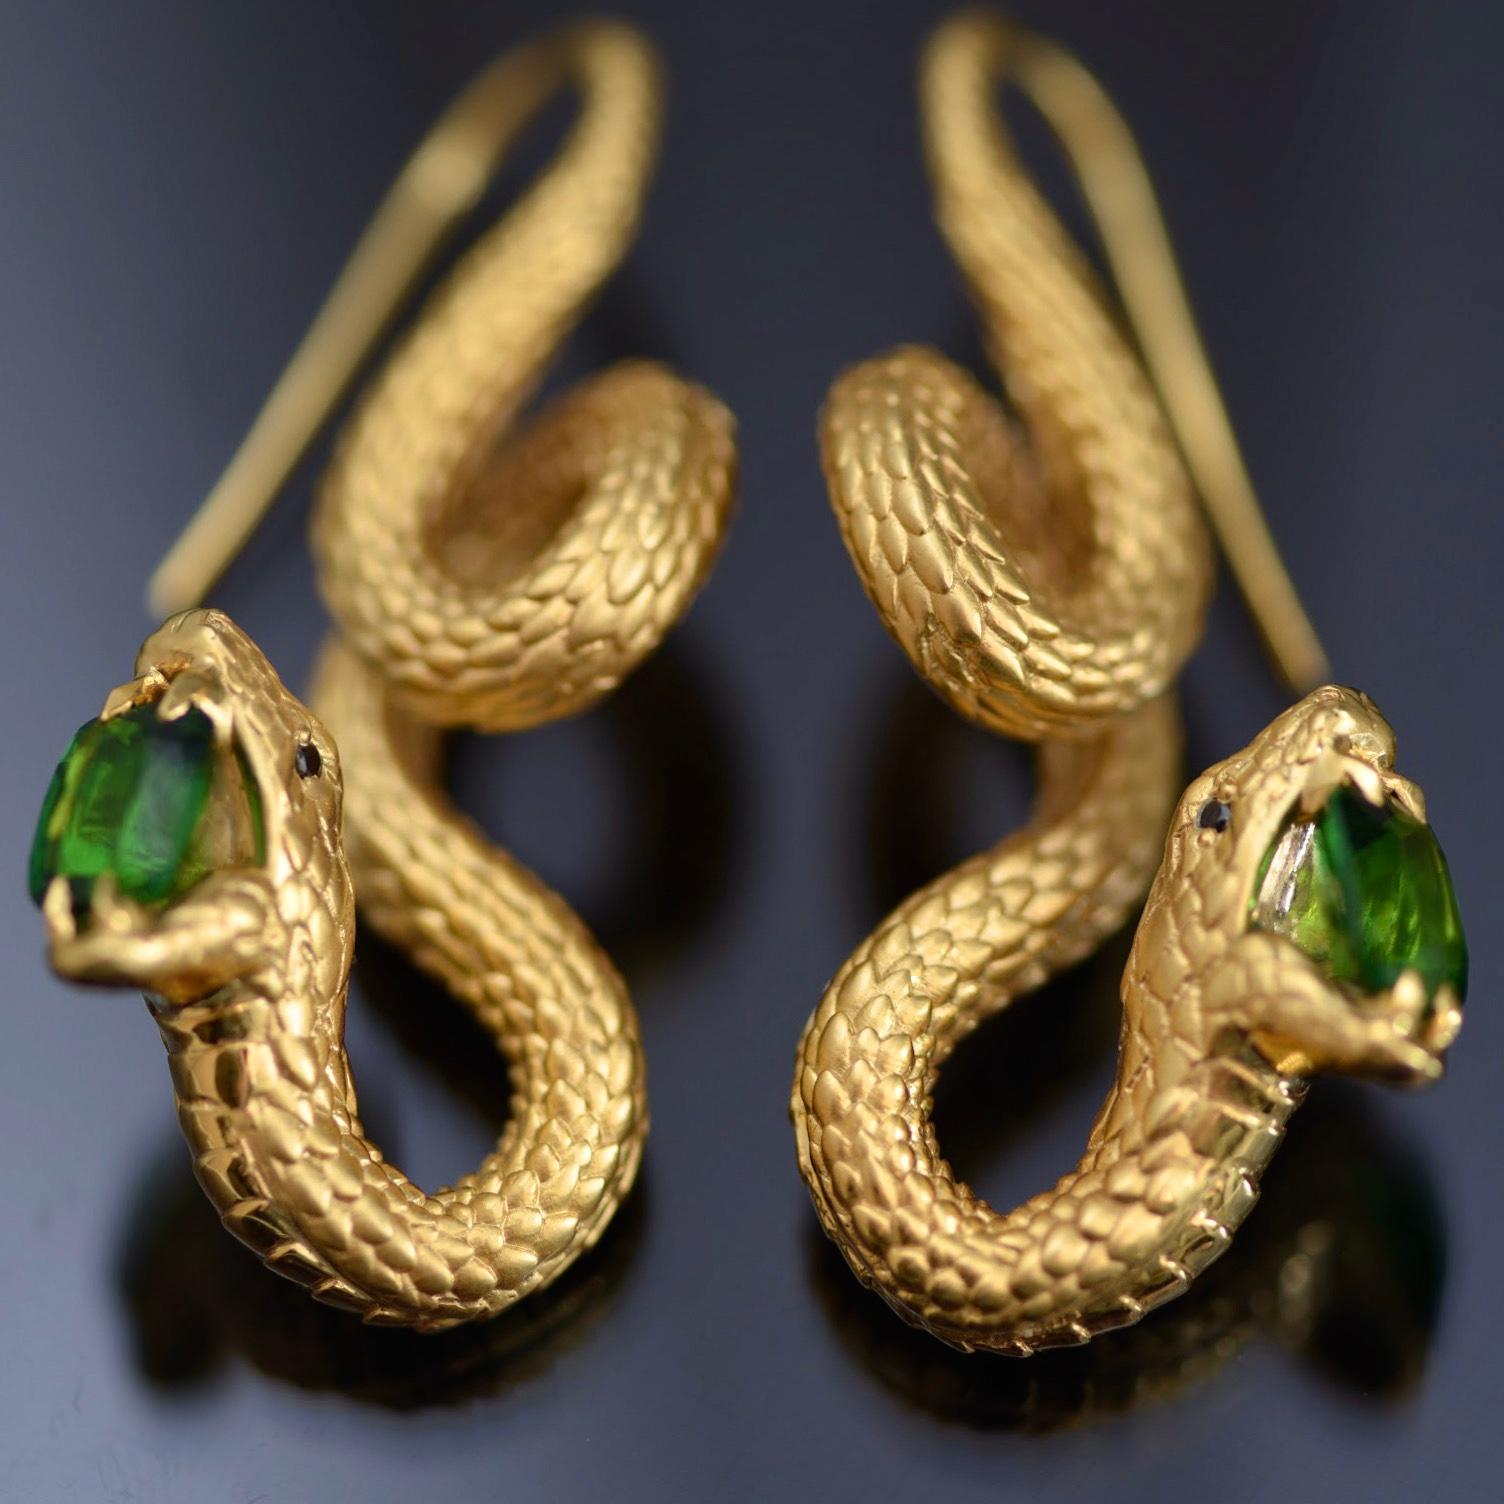 gold snakes